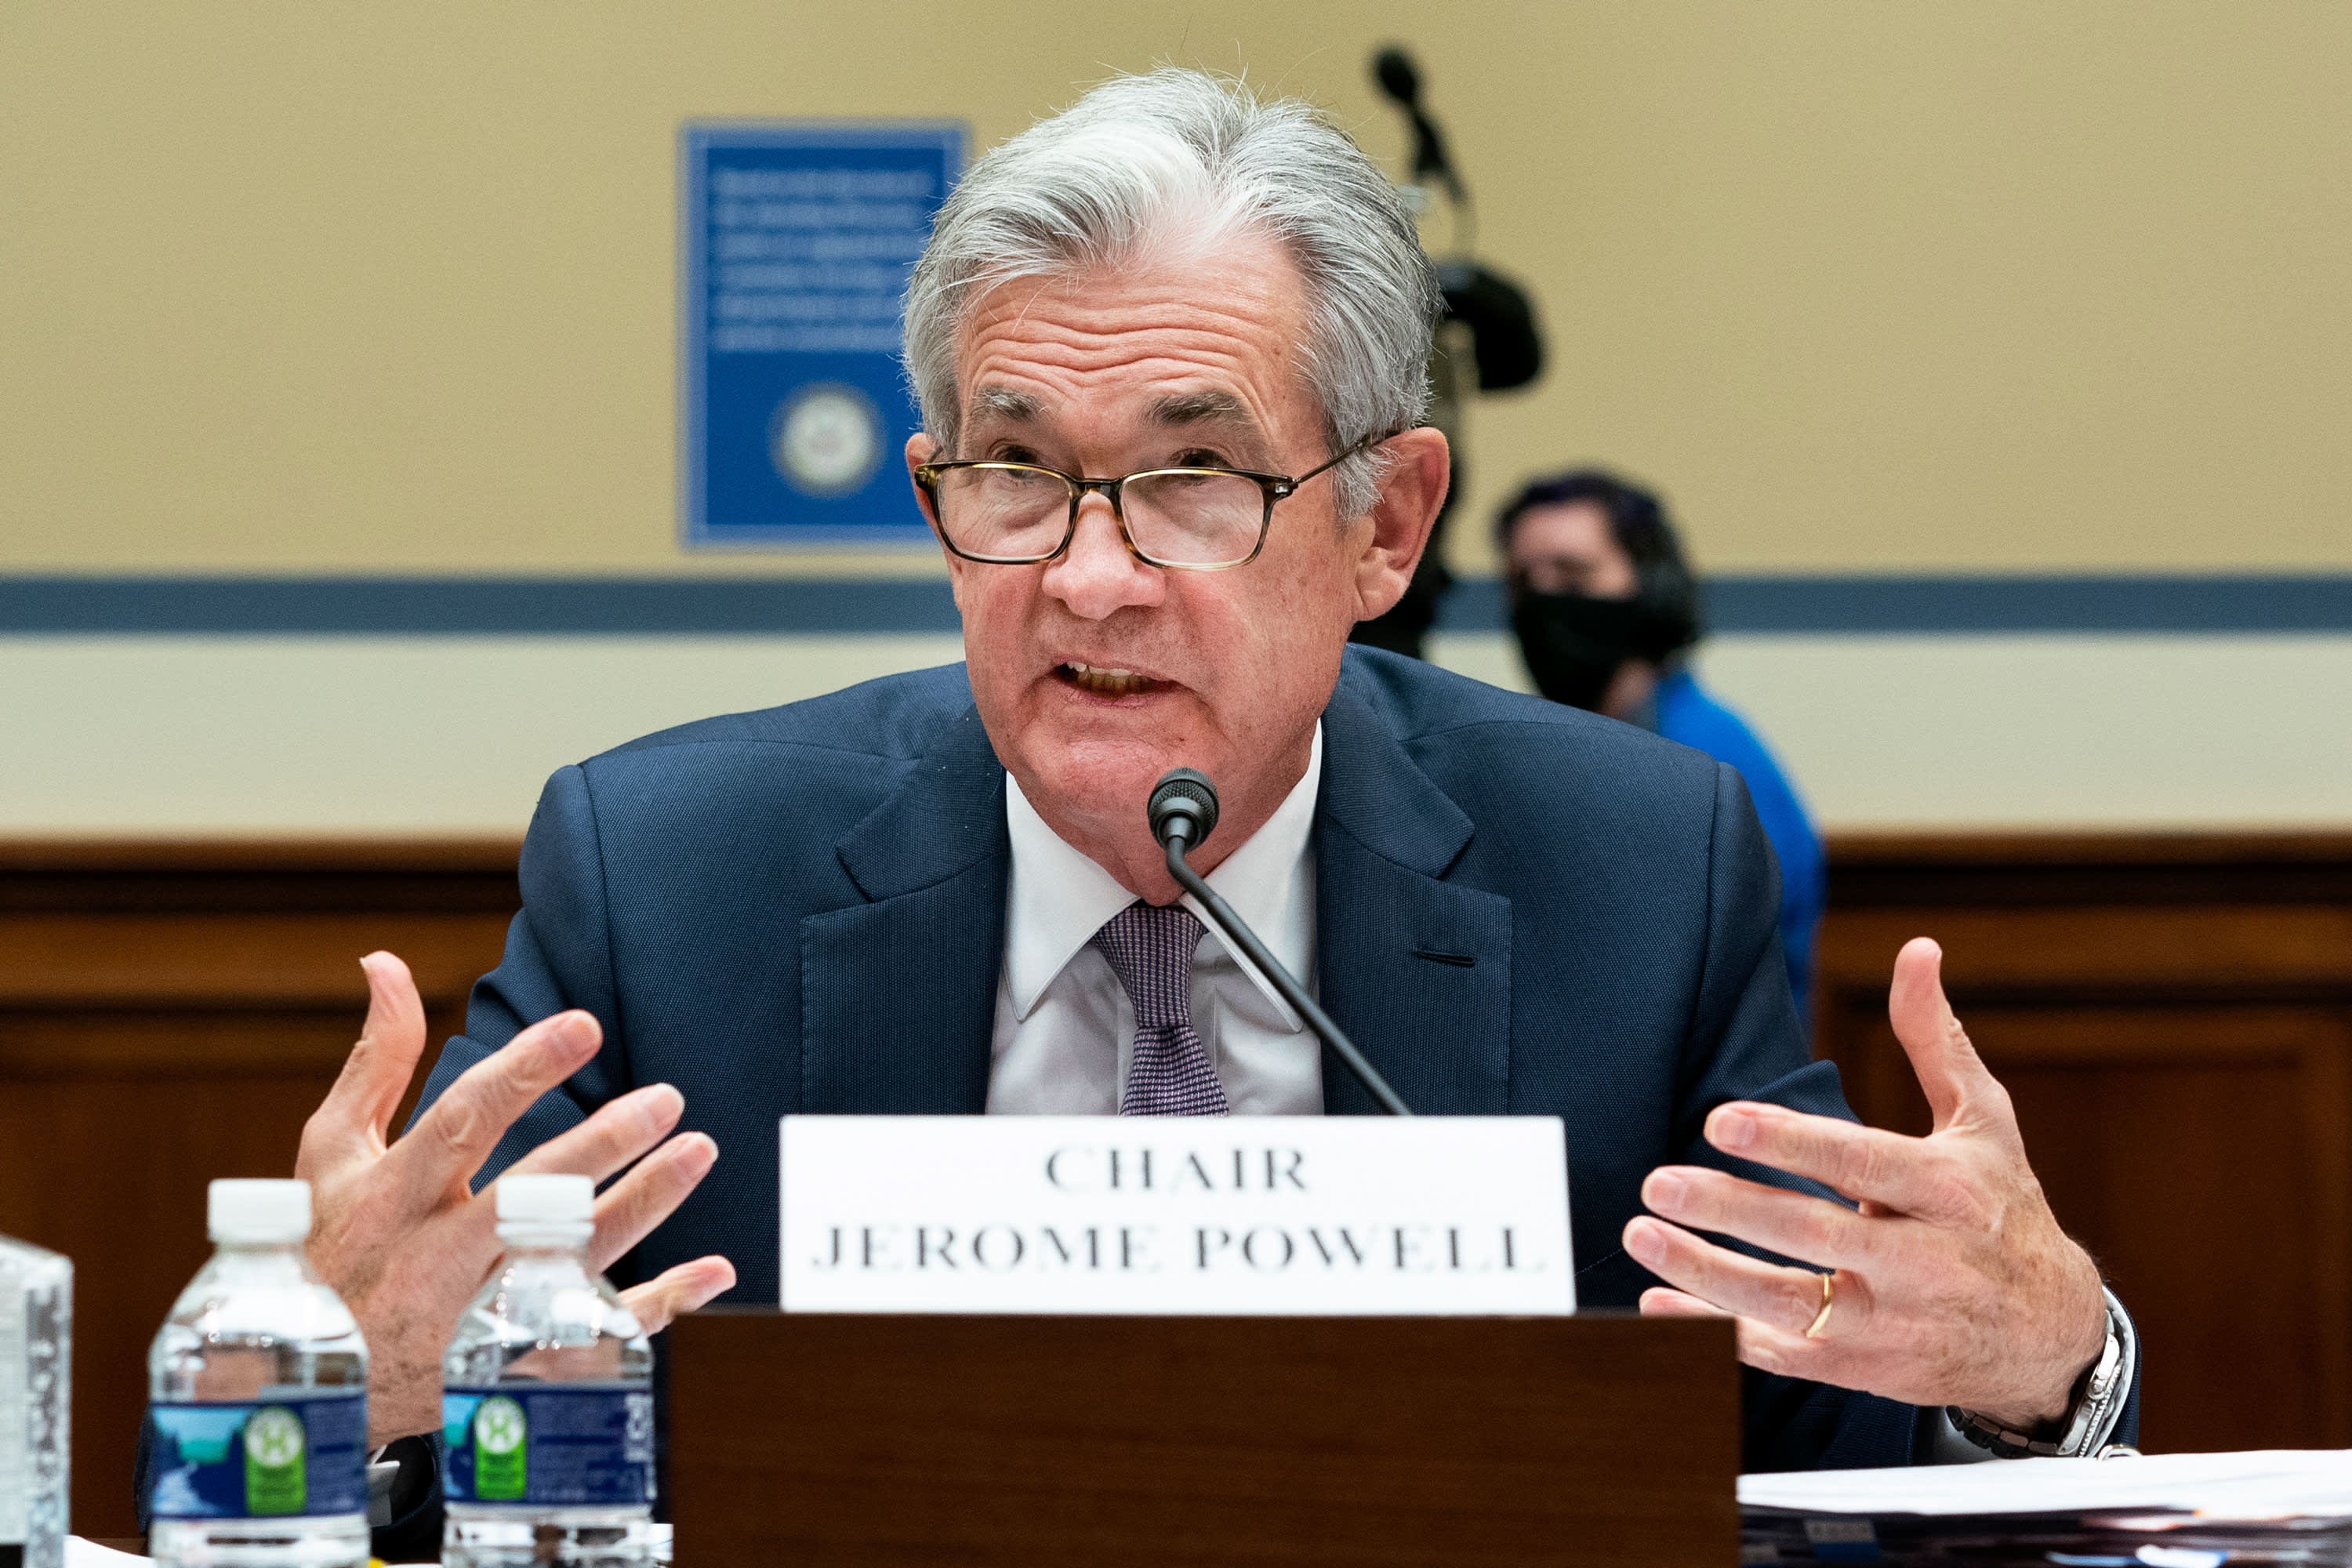 Powell sees no rise in interest rates on the horizon as long as inflation remains low